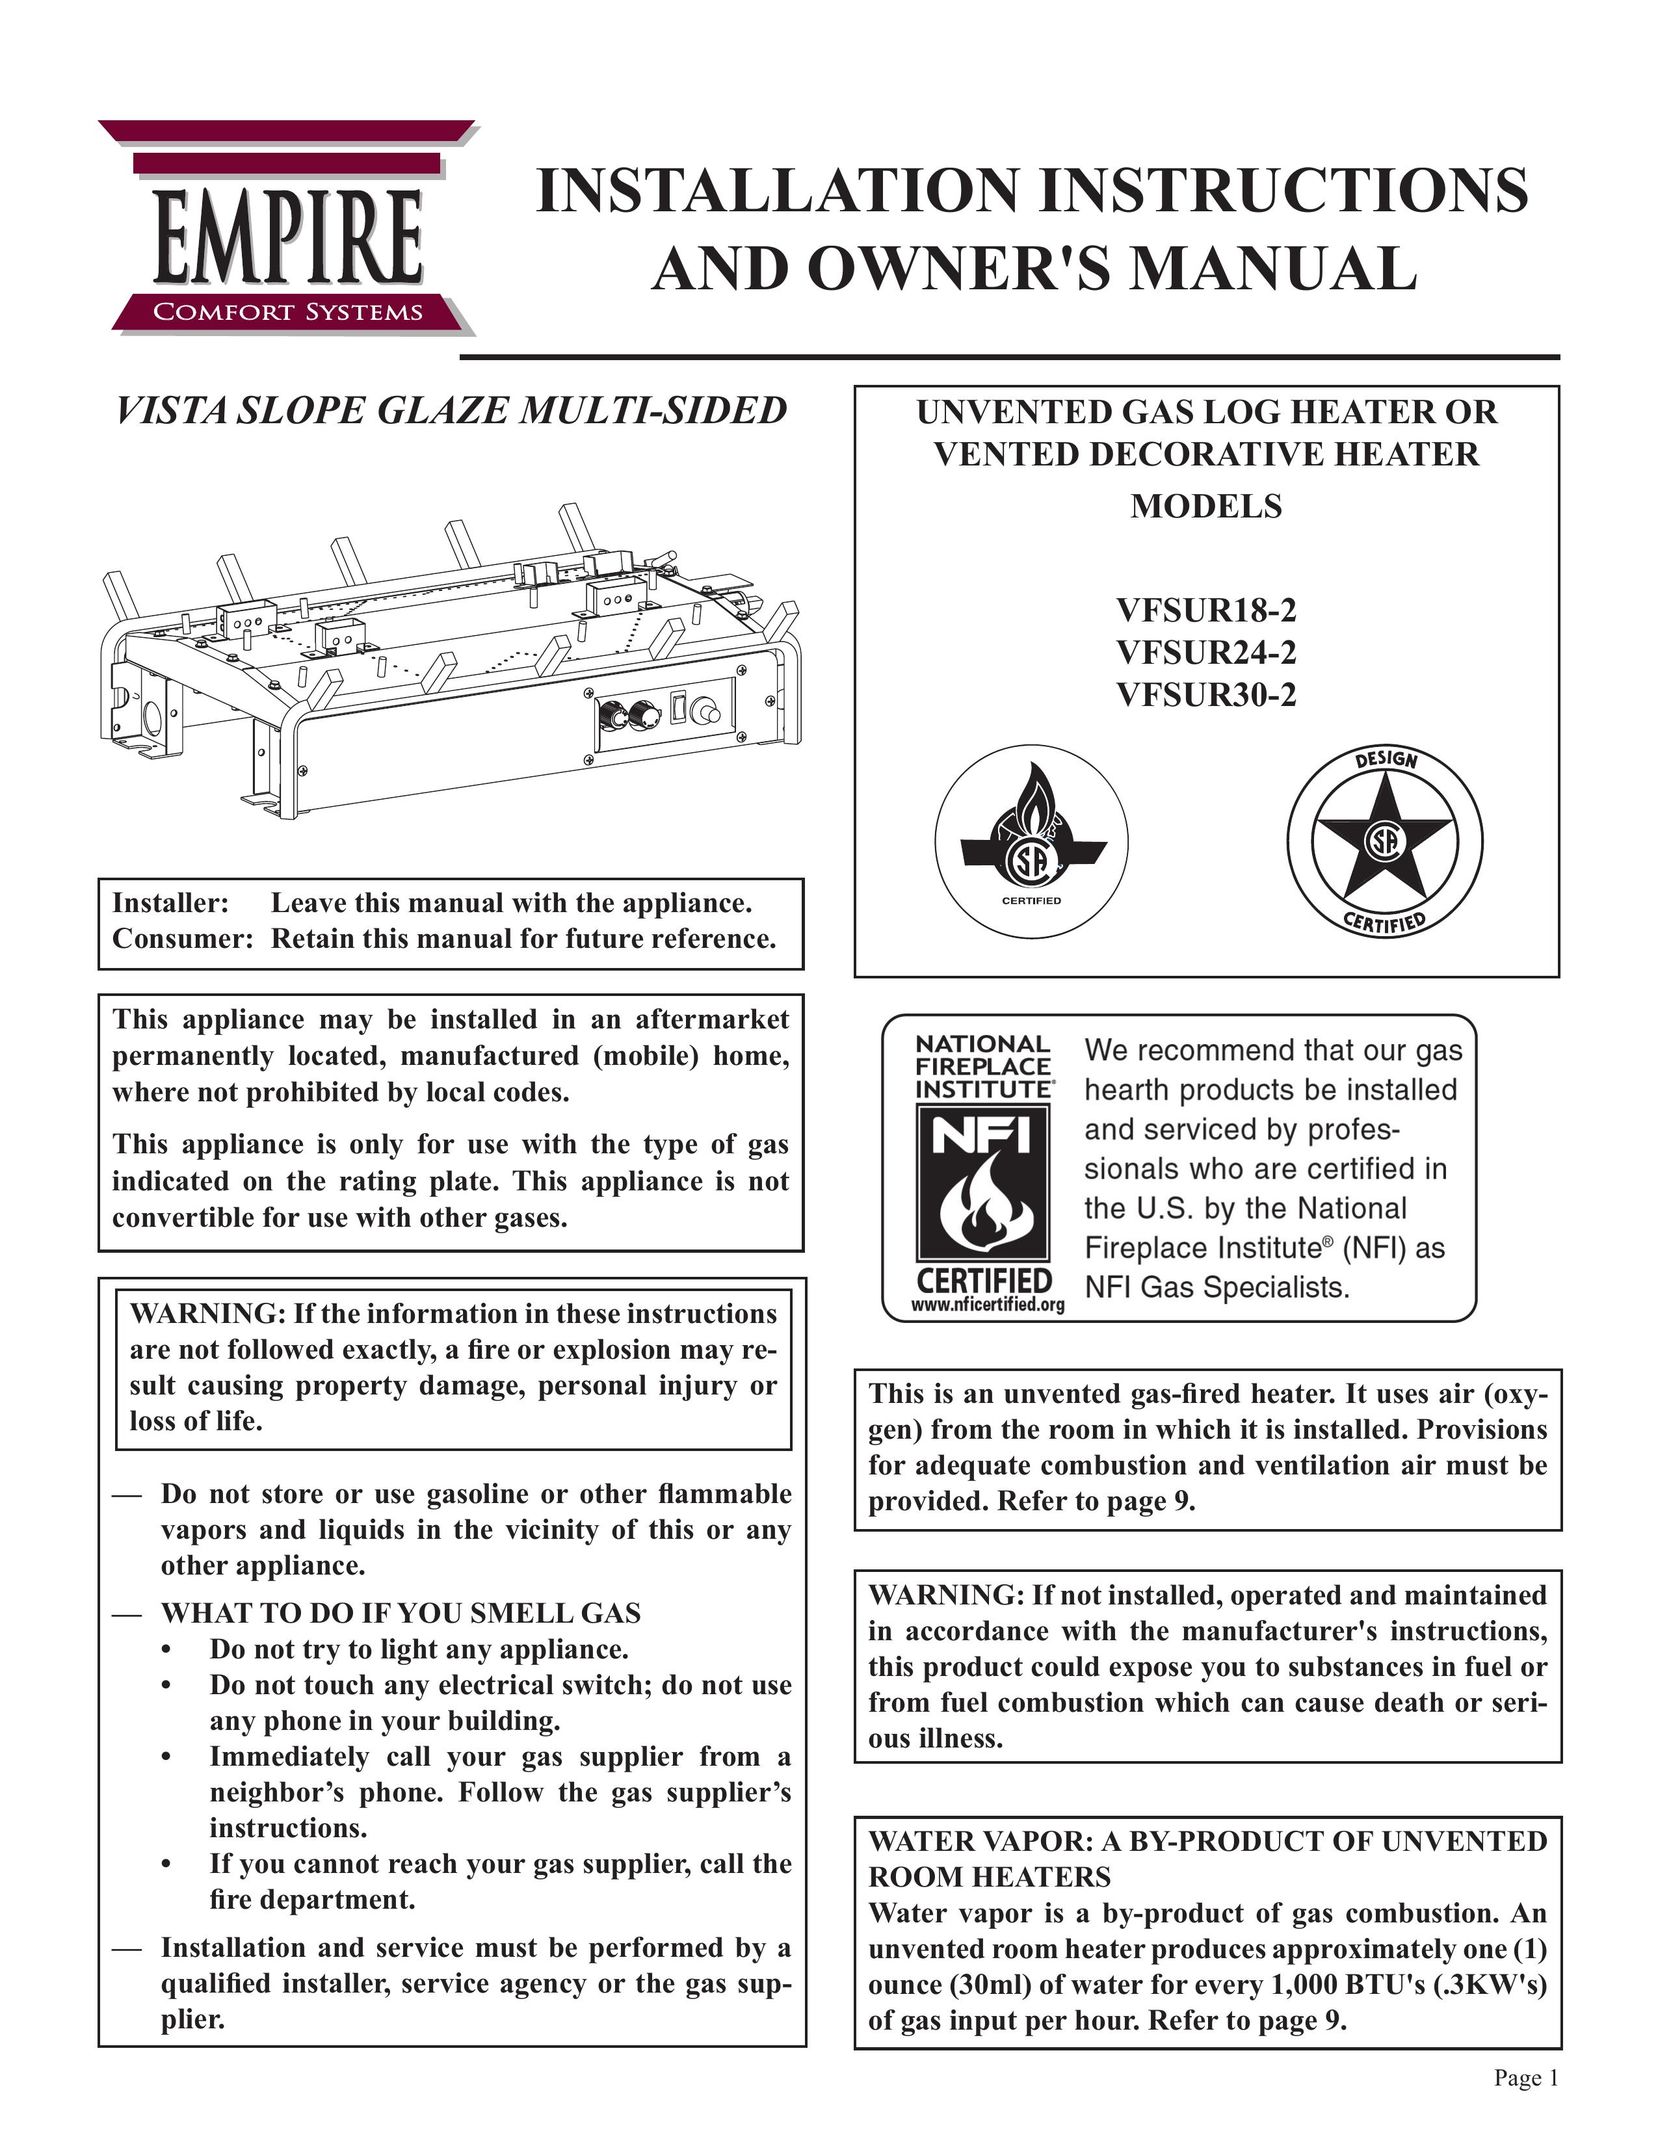 Empire Comfort Systems VFSUR24-2 Gas Heater User Manual